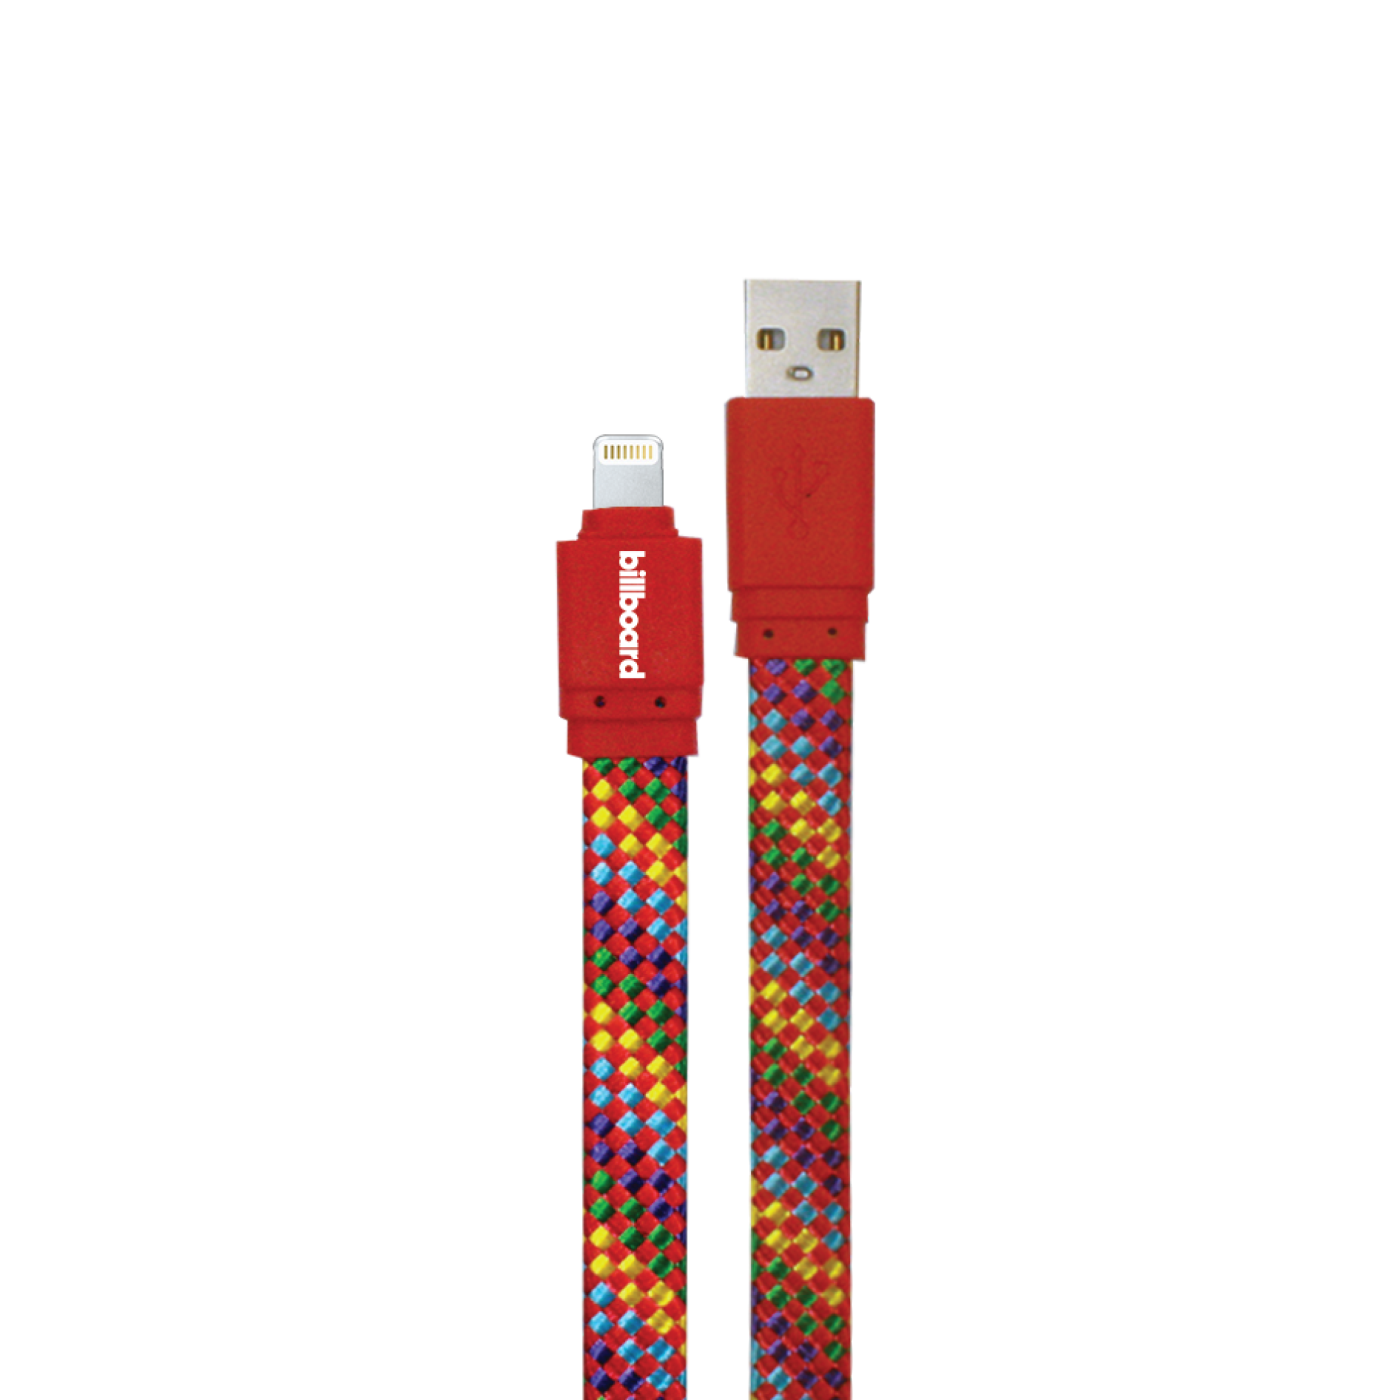 Sync & Charge Cable USB-C to USB-A 6' Red Color